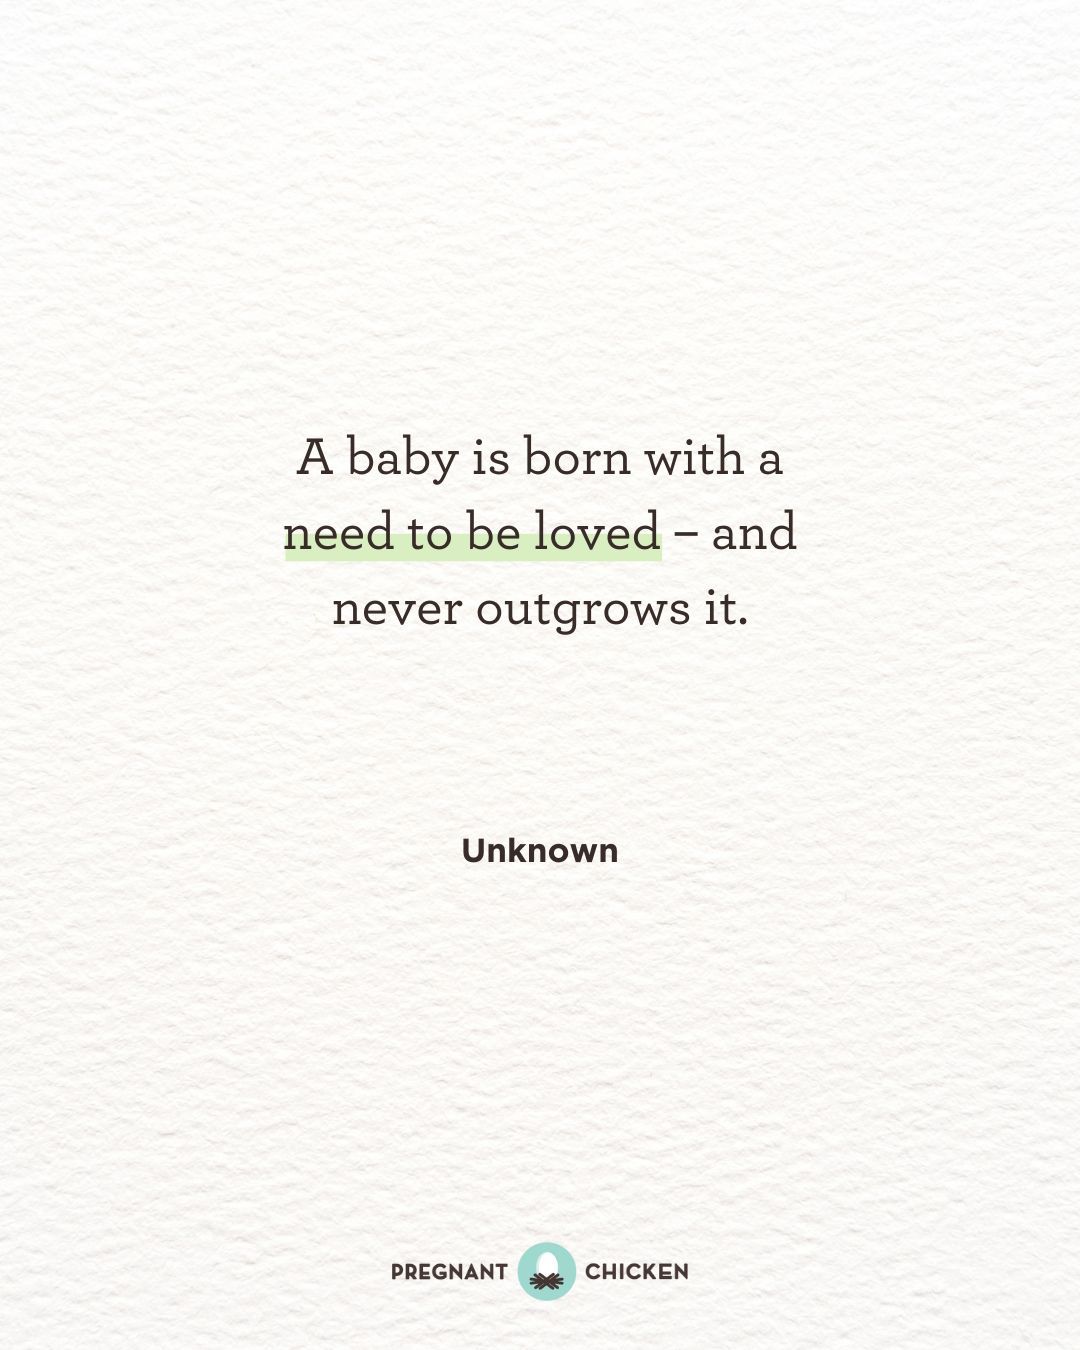 A baby is born with a need to be loved – and never outgrows it.